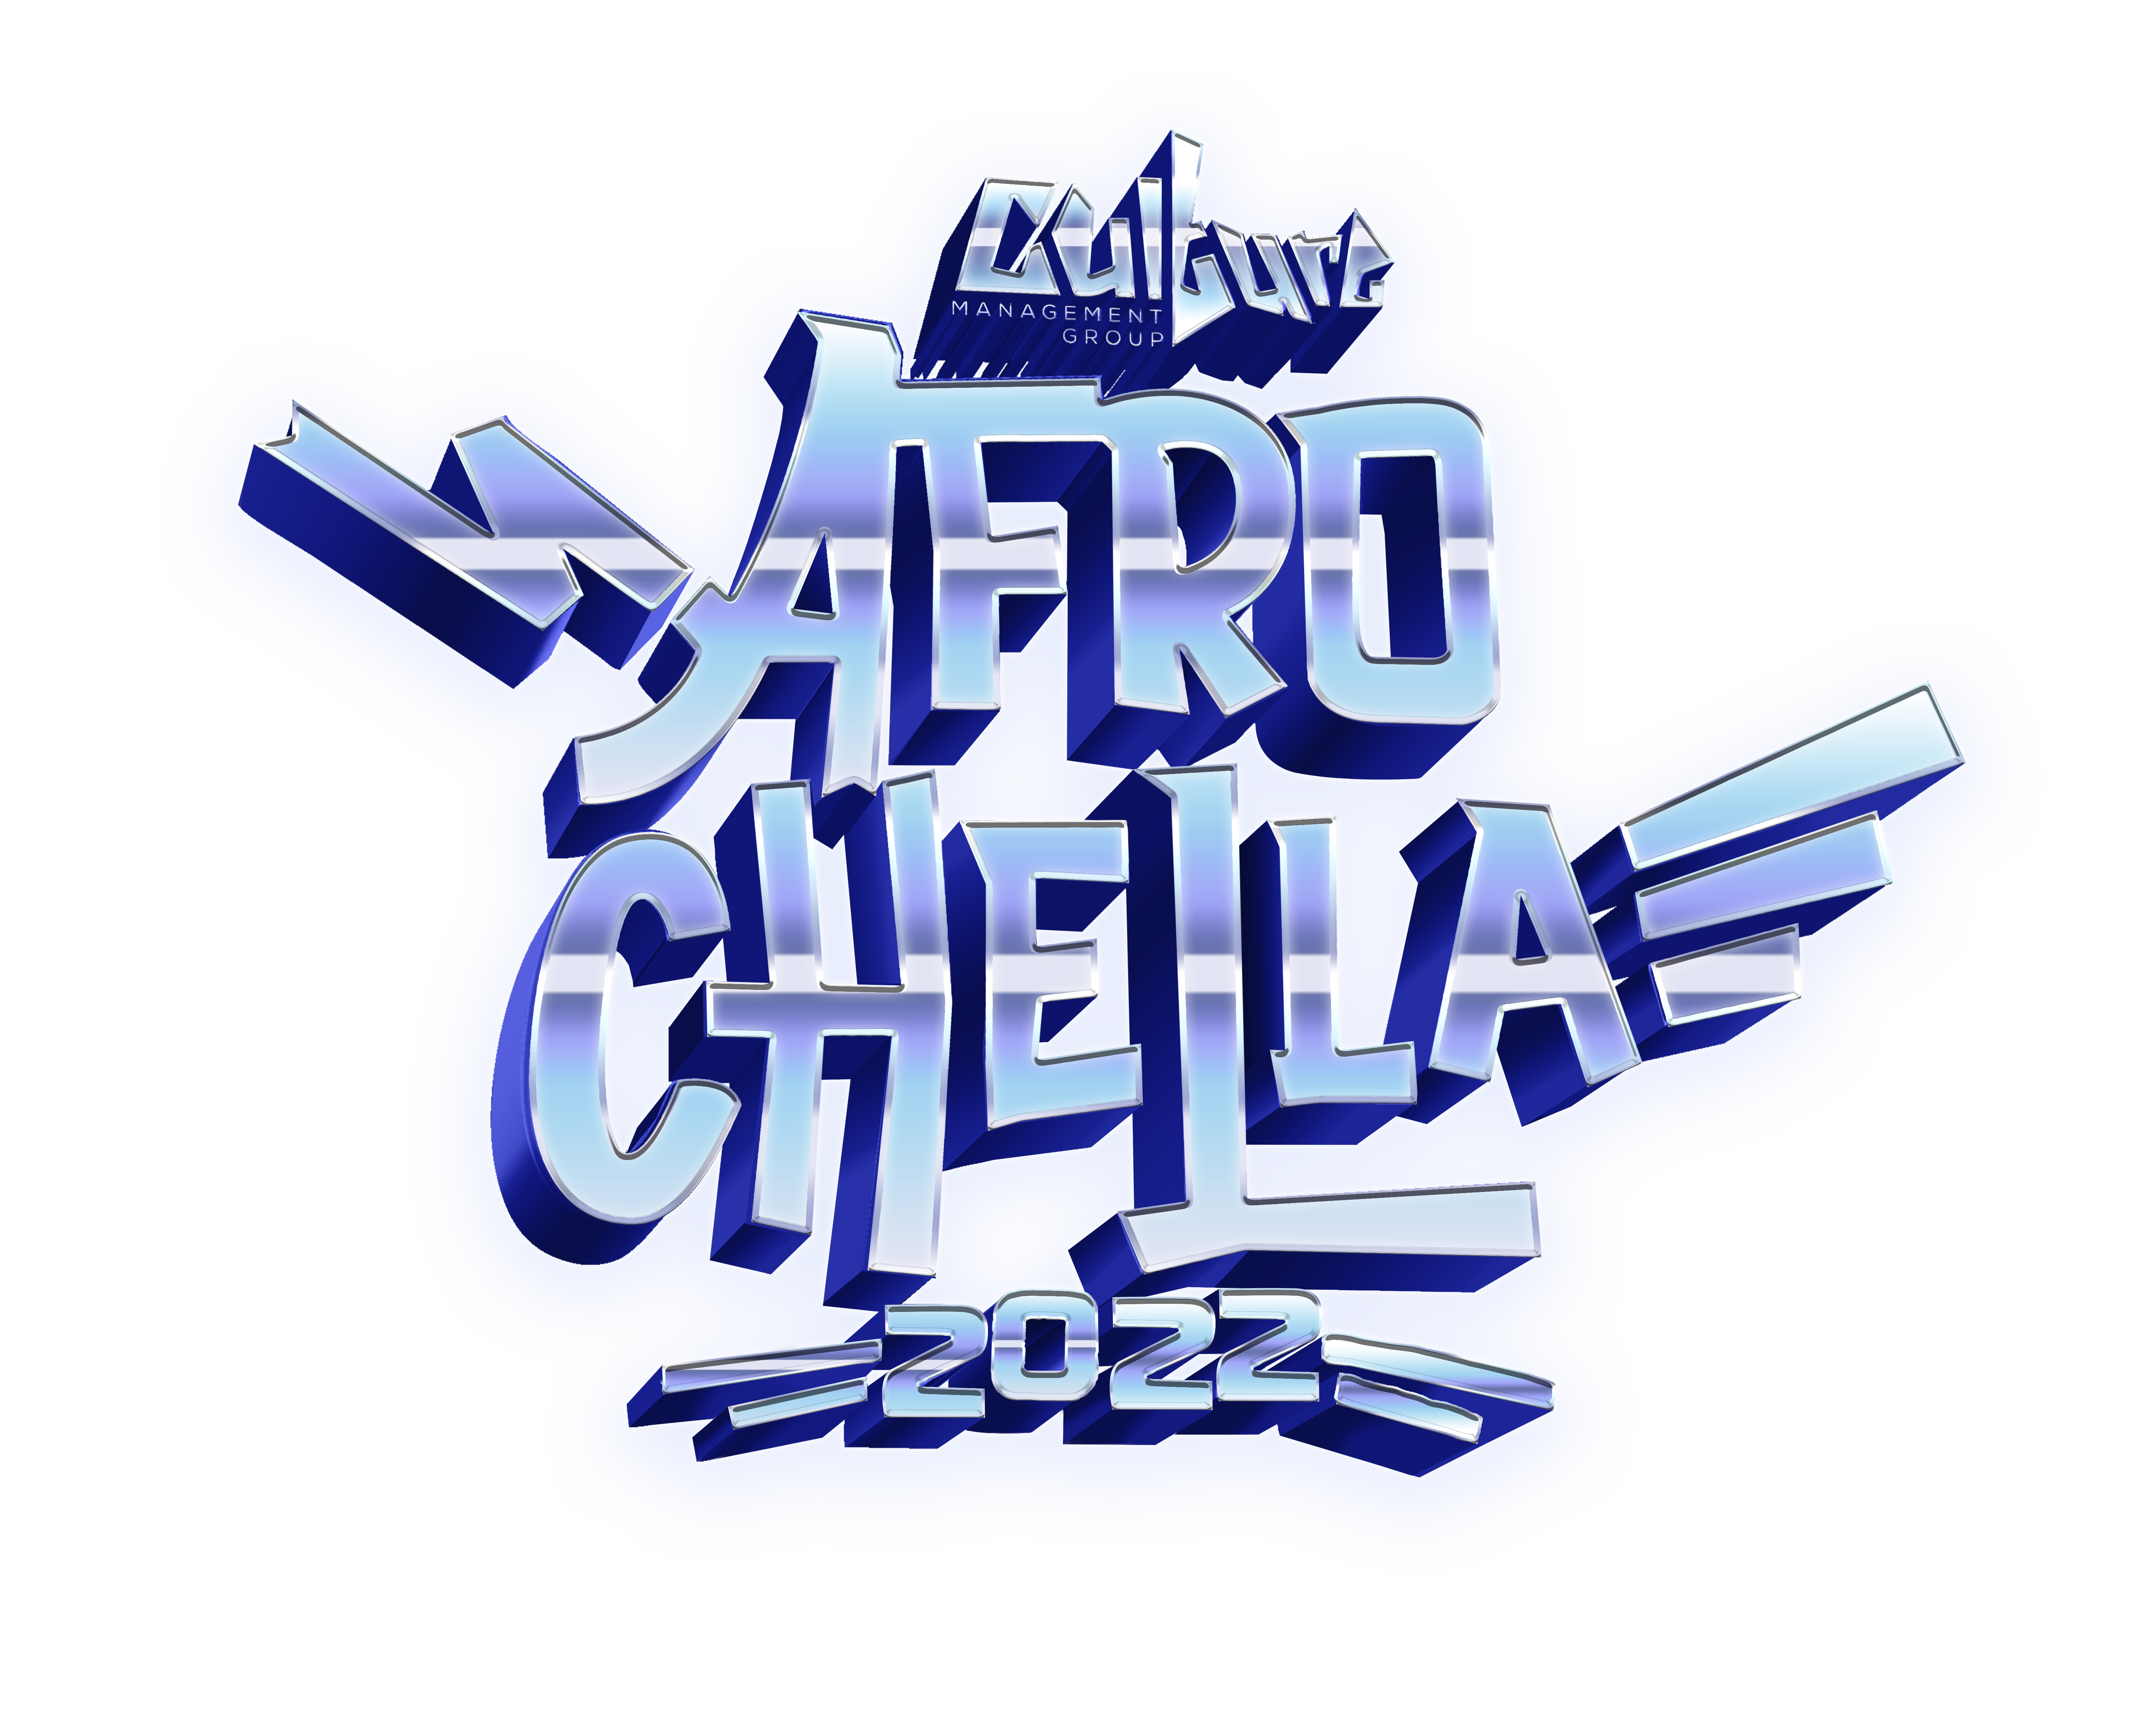 You are currently viewing Burna Boy and Stonebwoy Announced as Headliners for Afrochella Festival